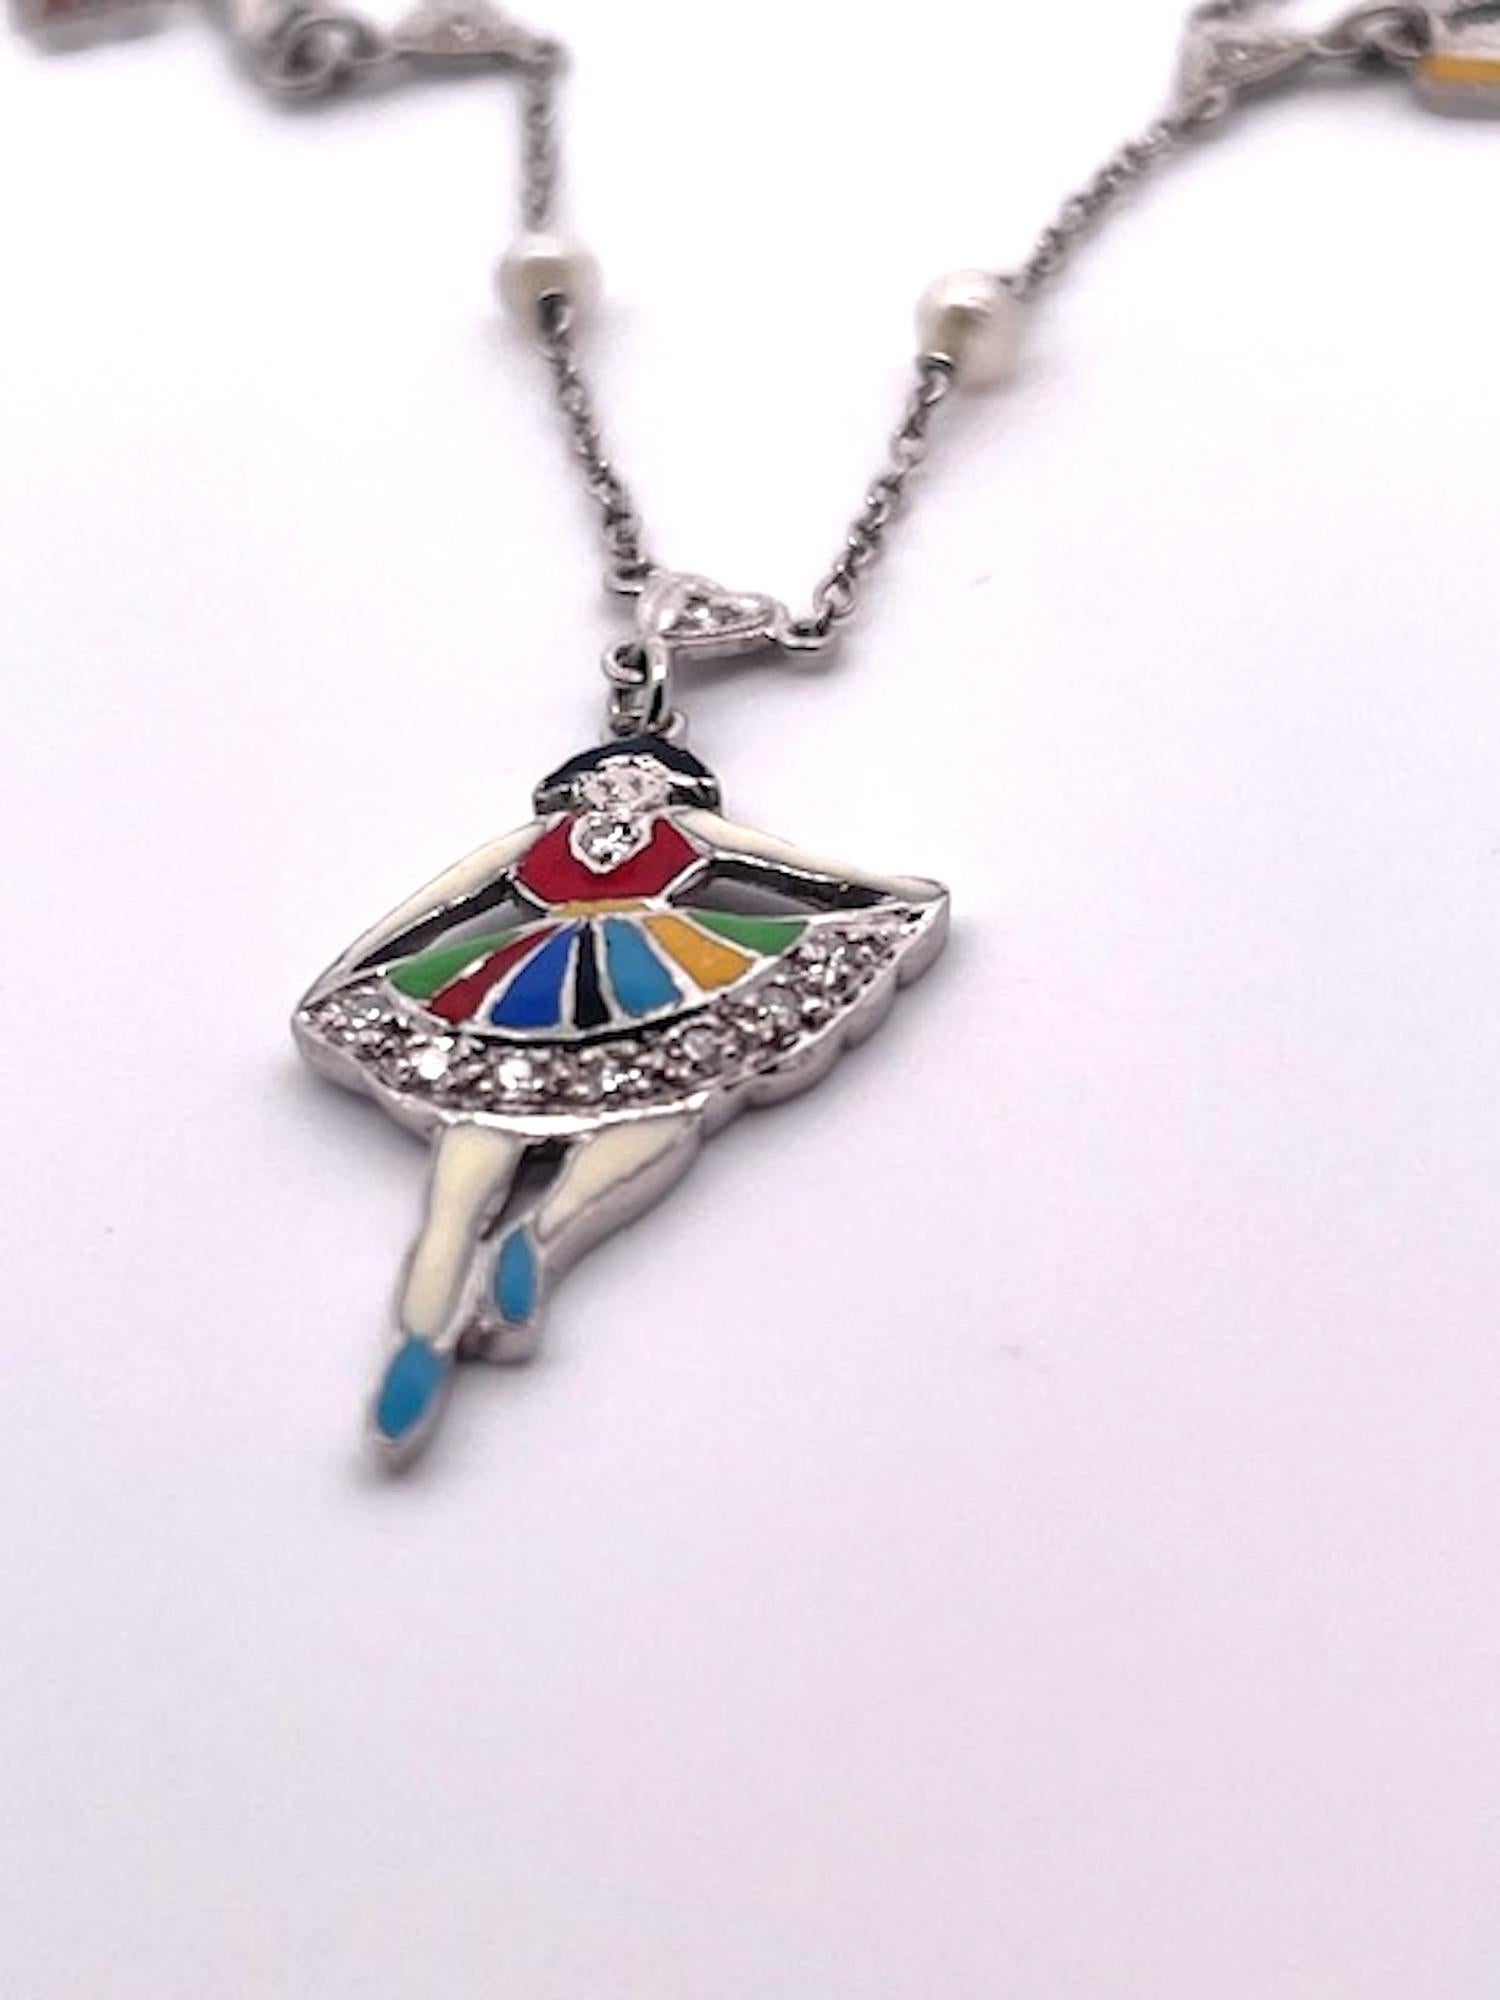 Deco 1930's to 1950's Enameled Diamond Charm Necklace In Good Condition For Sale In North Hollywood, CA